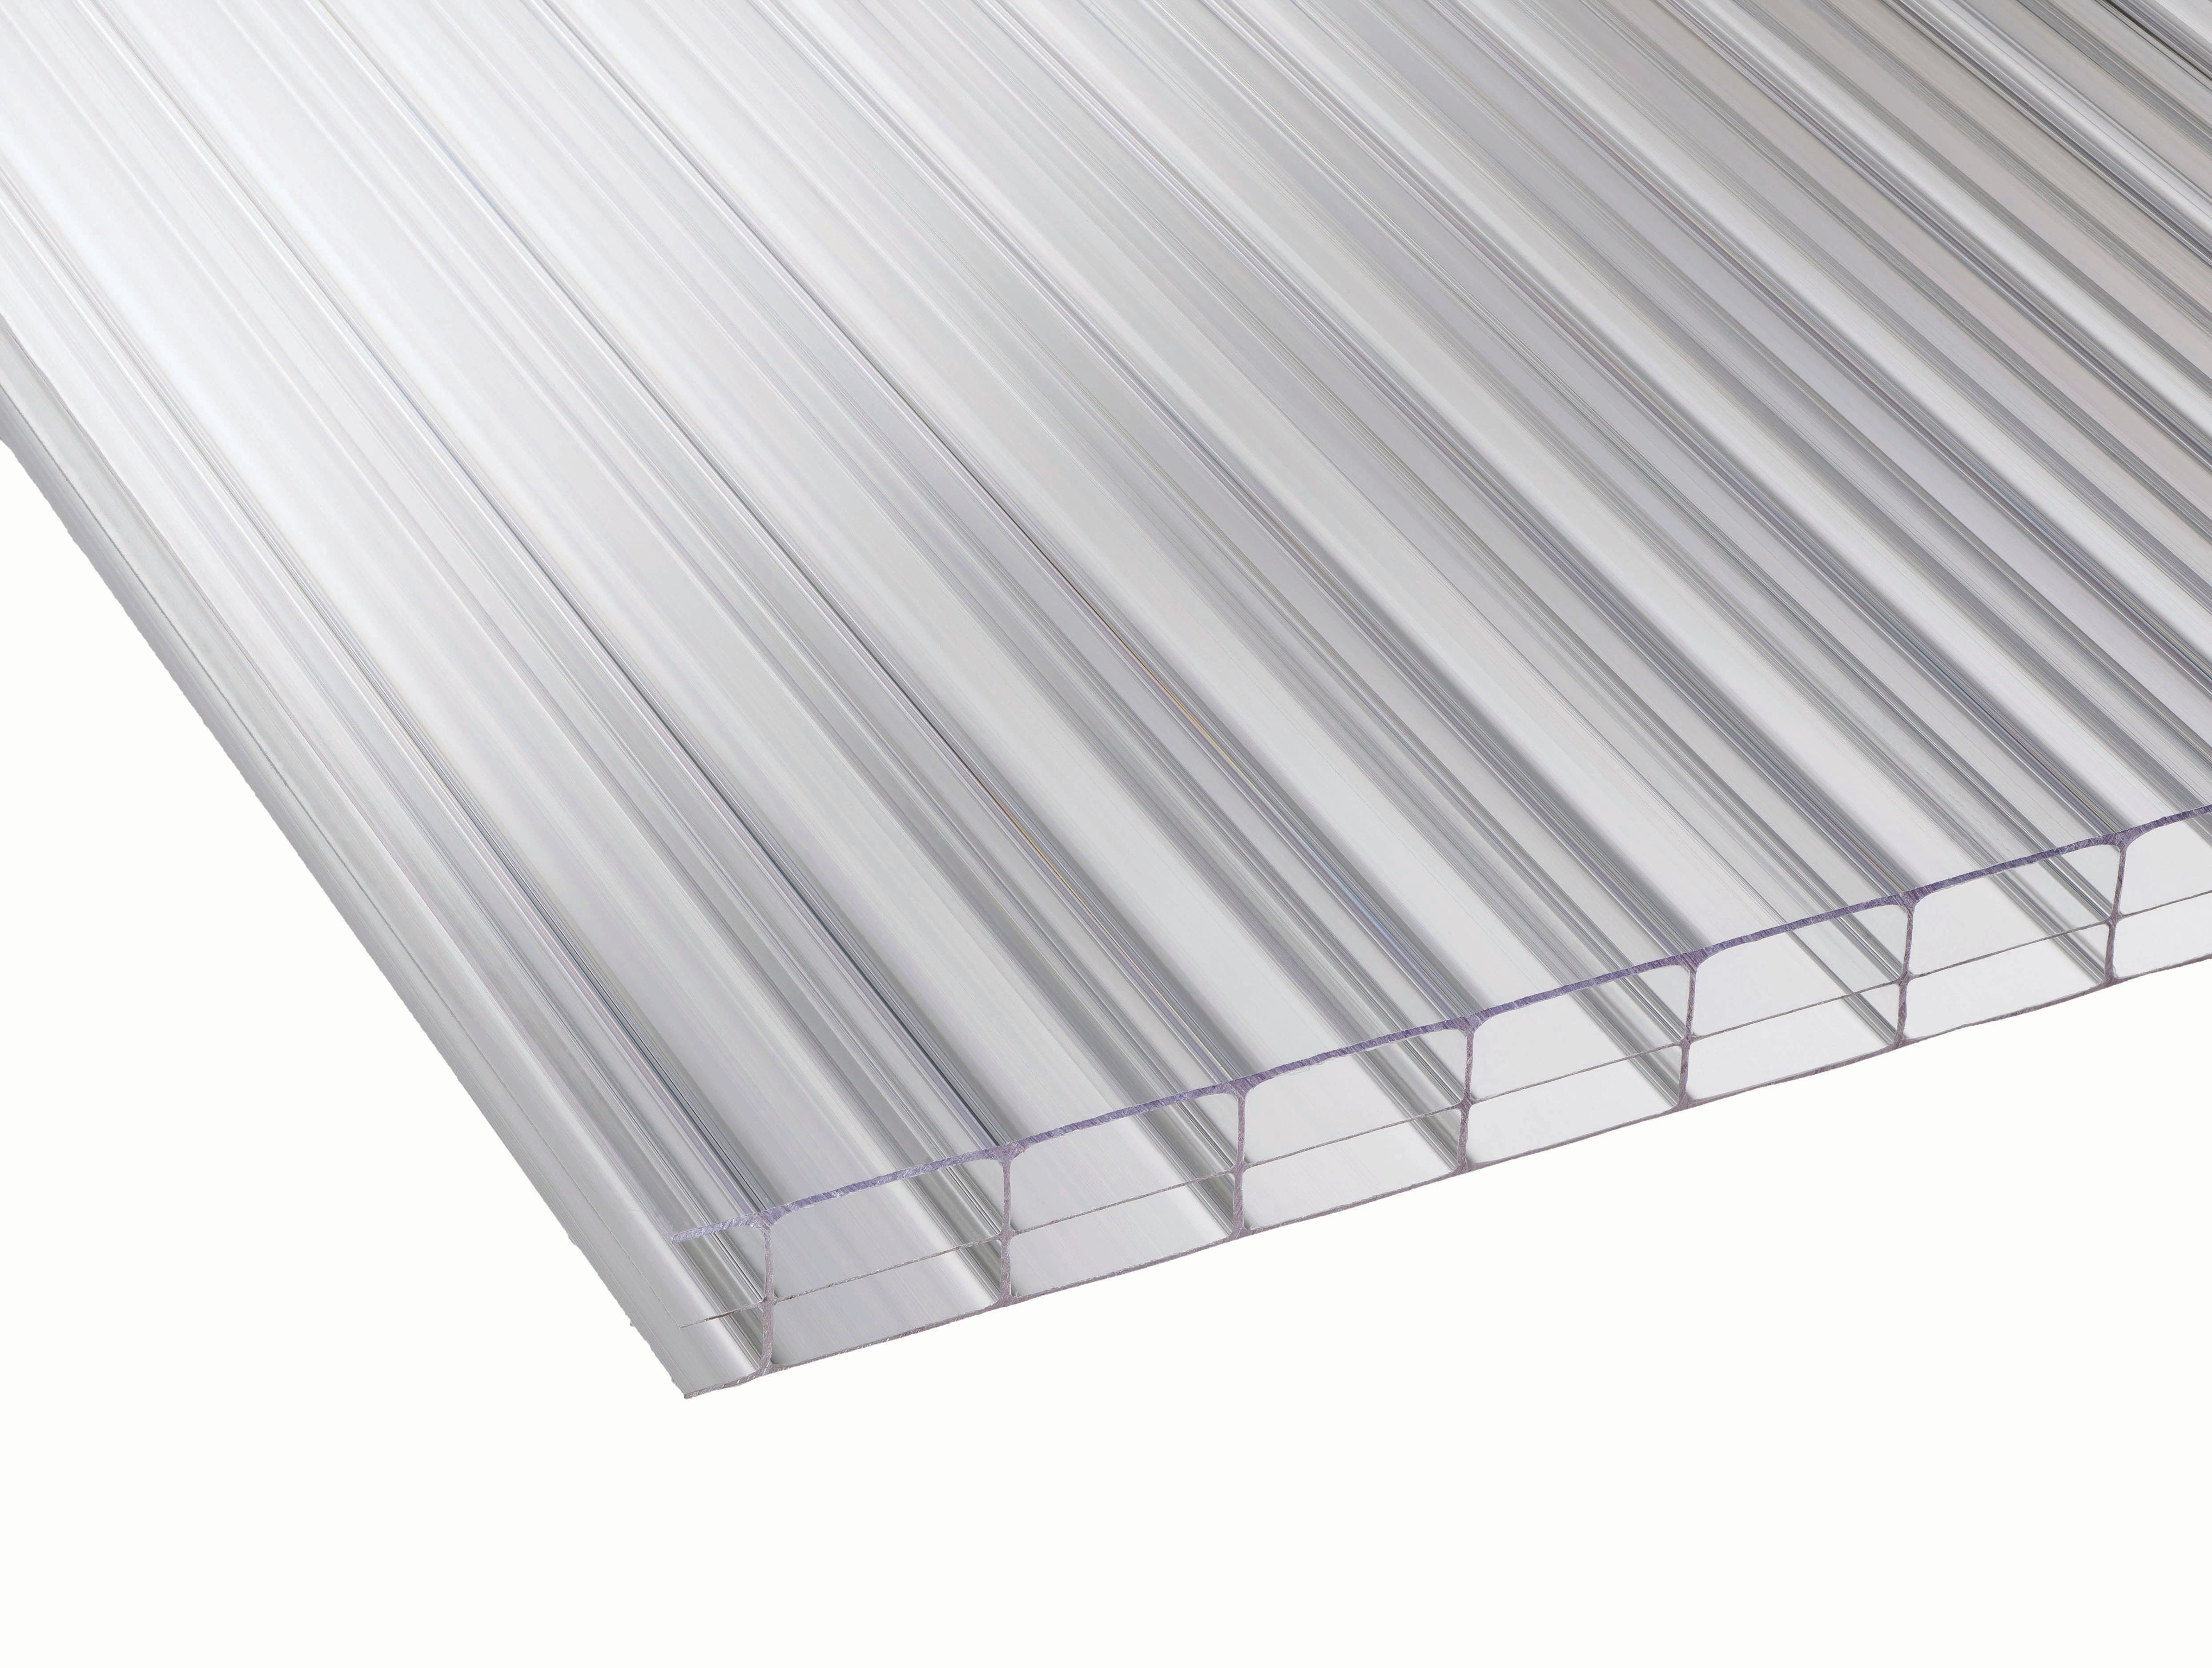 Image of 16mm Clear Multiwall Polycarbonate Sheet - 4000 x 1050mm